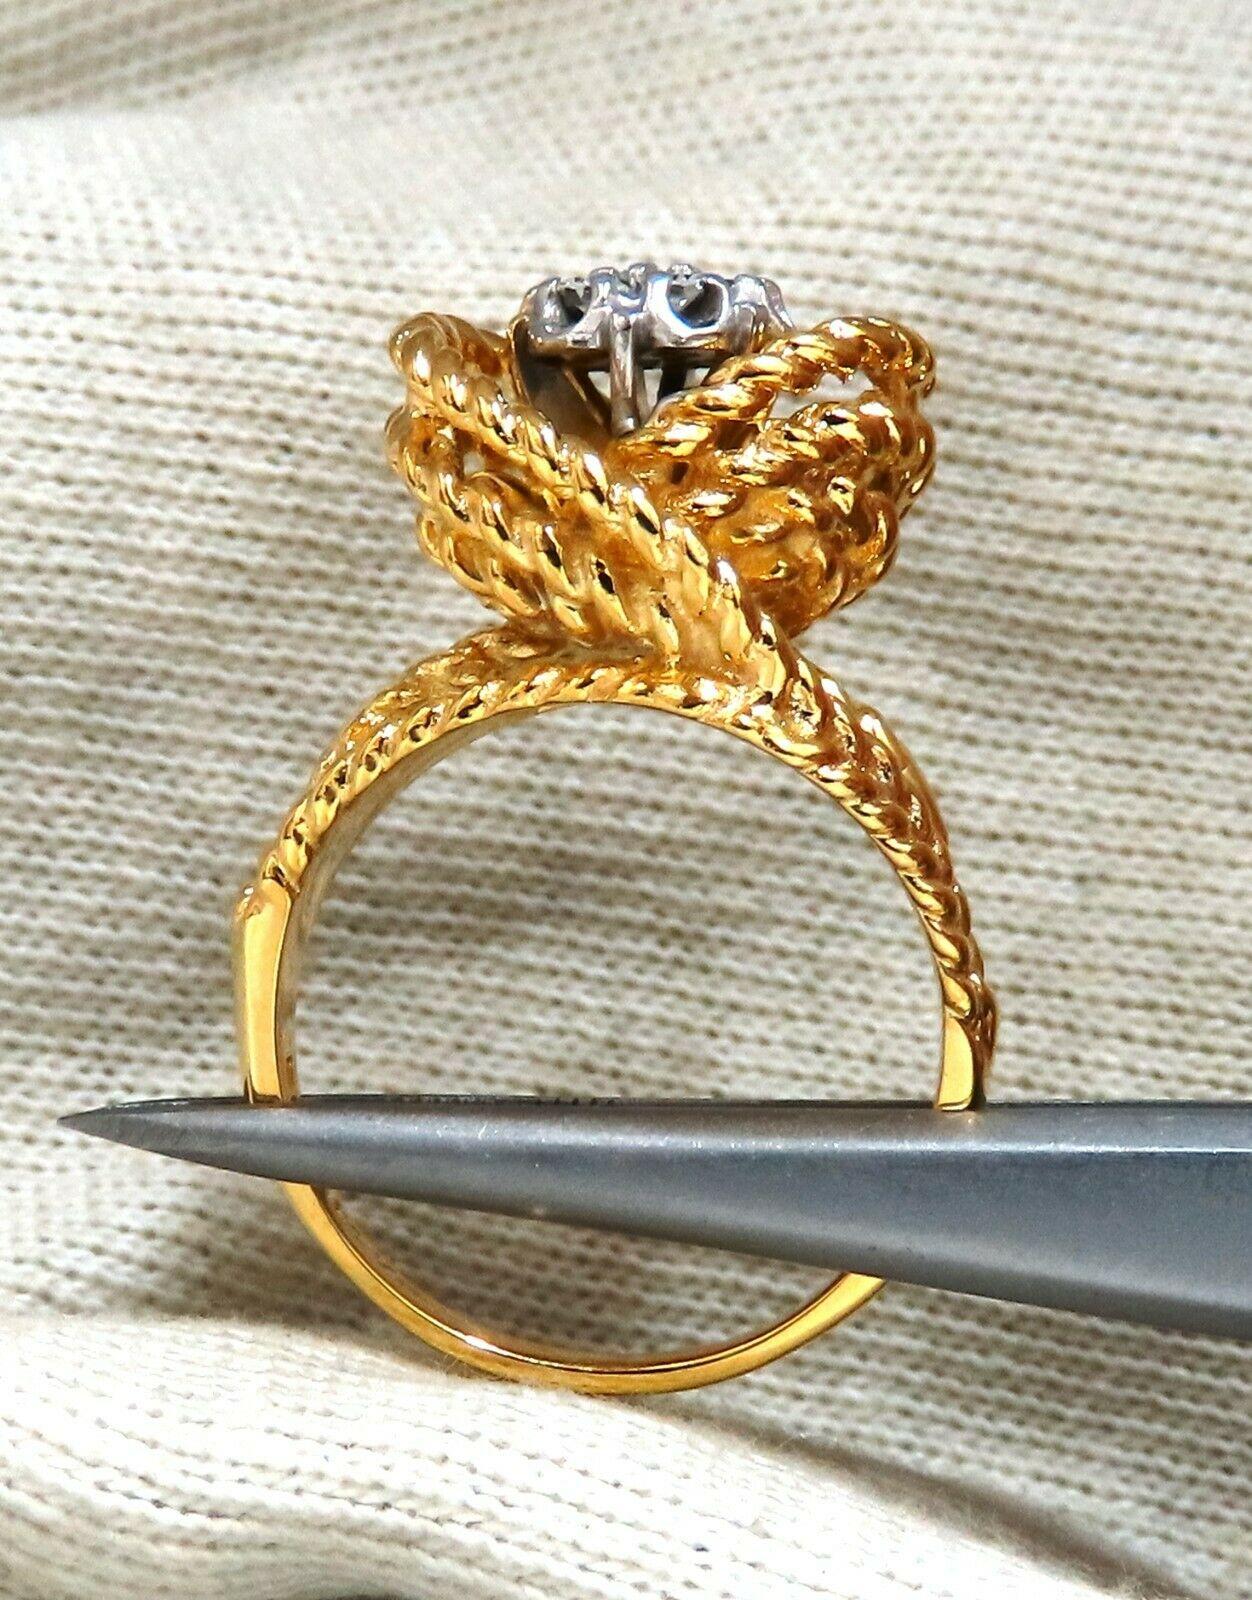 Rope Twist Cluster

.35ct Natural Round Cut Diamonds. 

Vs-2 clarity H color.

14kt yellow gold

8.3 Grams

Overall ring: 16.3mm 

Depth: 12mm

Current ring size: 7.5

May professionally resize, please inquire.